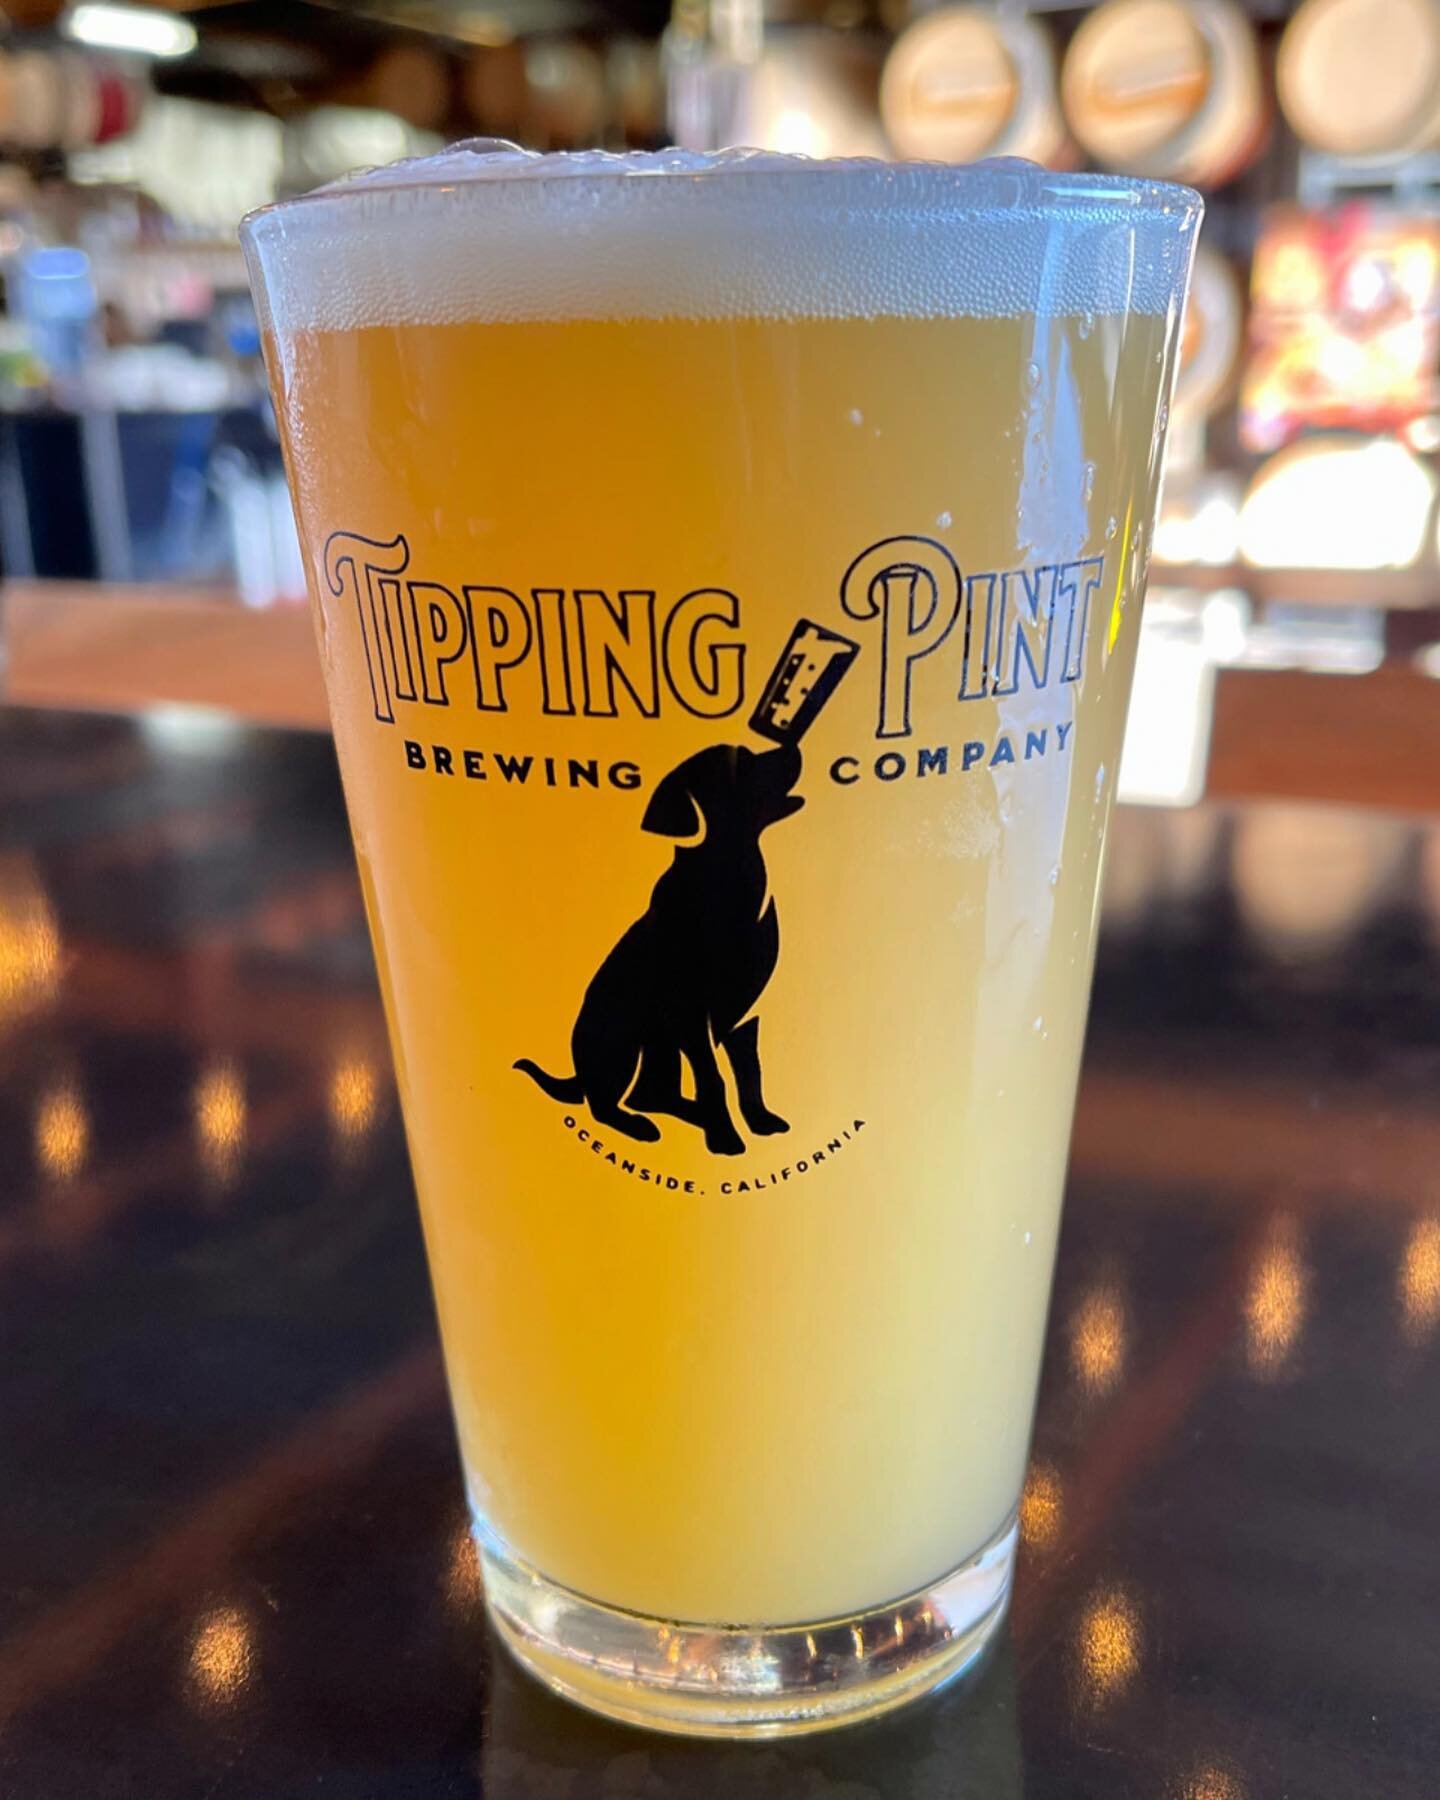 Happy #thirstythursday friends! Come on by for a few pints and don&rsquo;t forget we&rsquo;ve got yummy pizza tonight too! 🍕🍺
@scuderie_italia

We are Inside Hangar76 Co-op
3229 Roymar, Oceanside CA 92056
M-Th 3-8pm, Fri- 3-10pm
Sat- 12-10pm, Sun- 